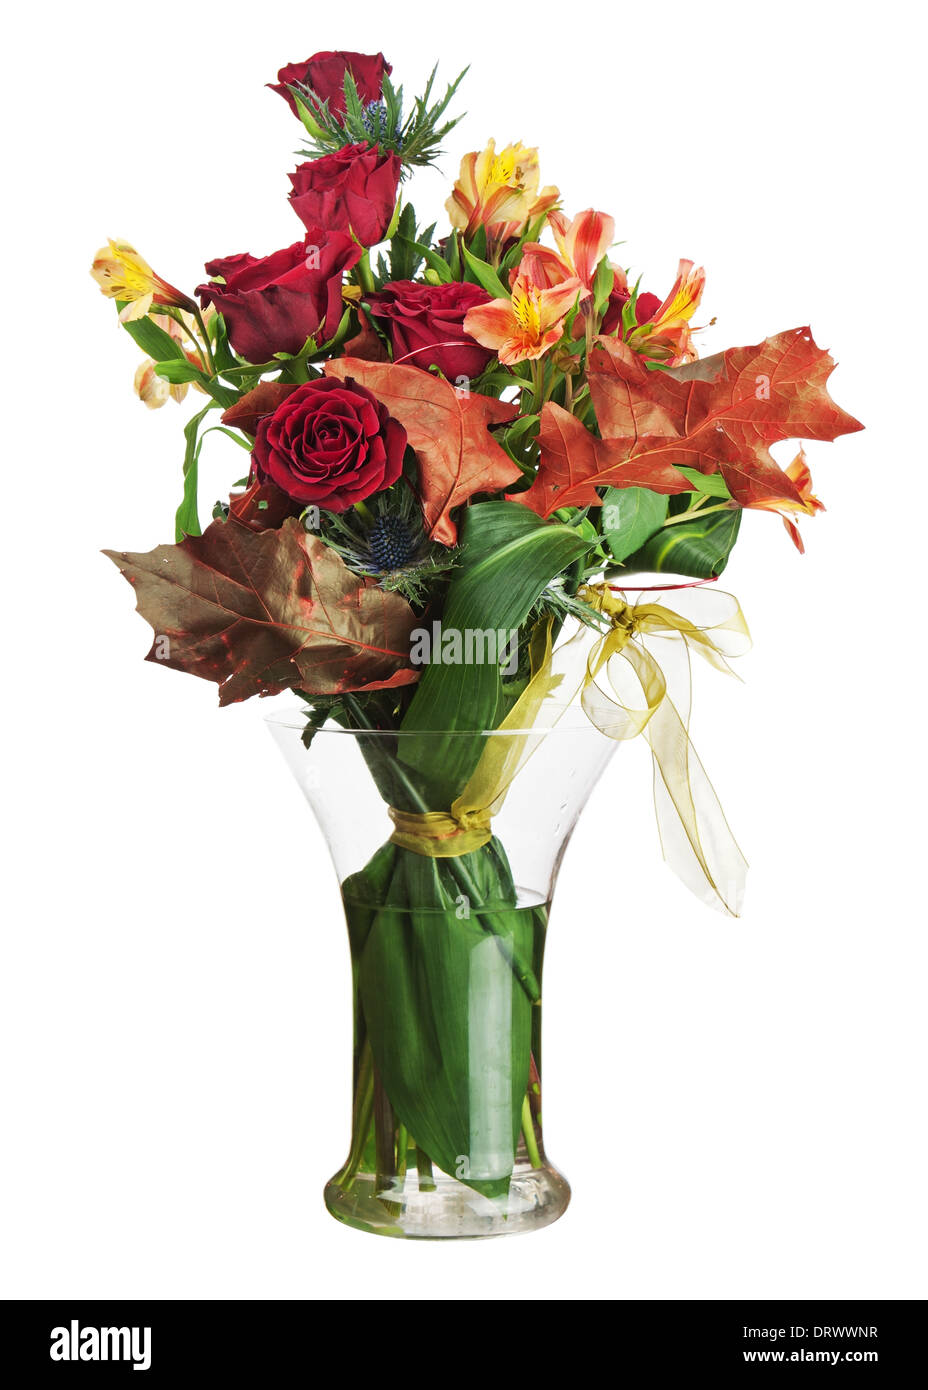 Floral bouquet of roses and lilies arrangement centerpiece in glass vase isolated on white background. Closeup. Stock Photo